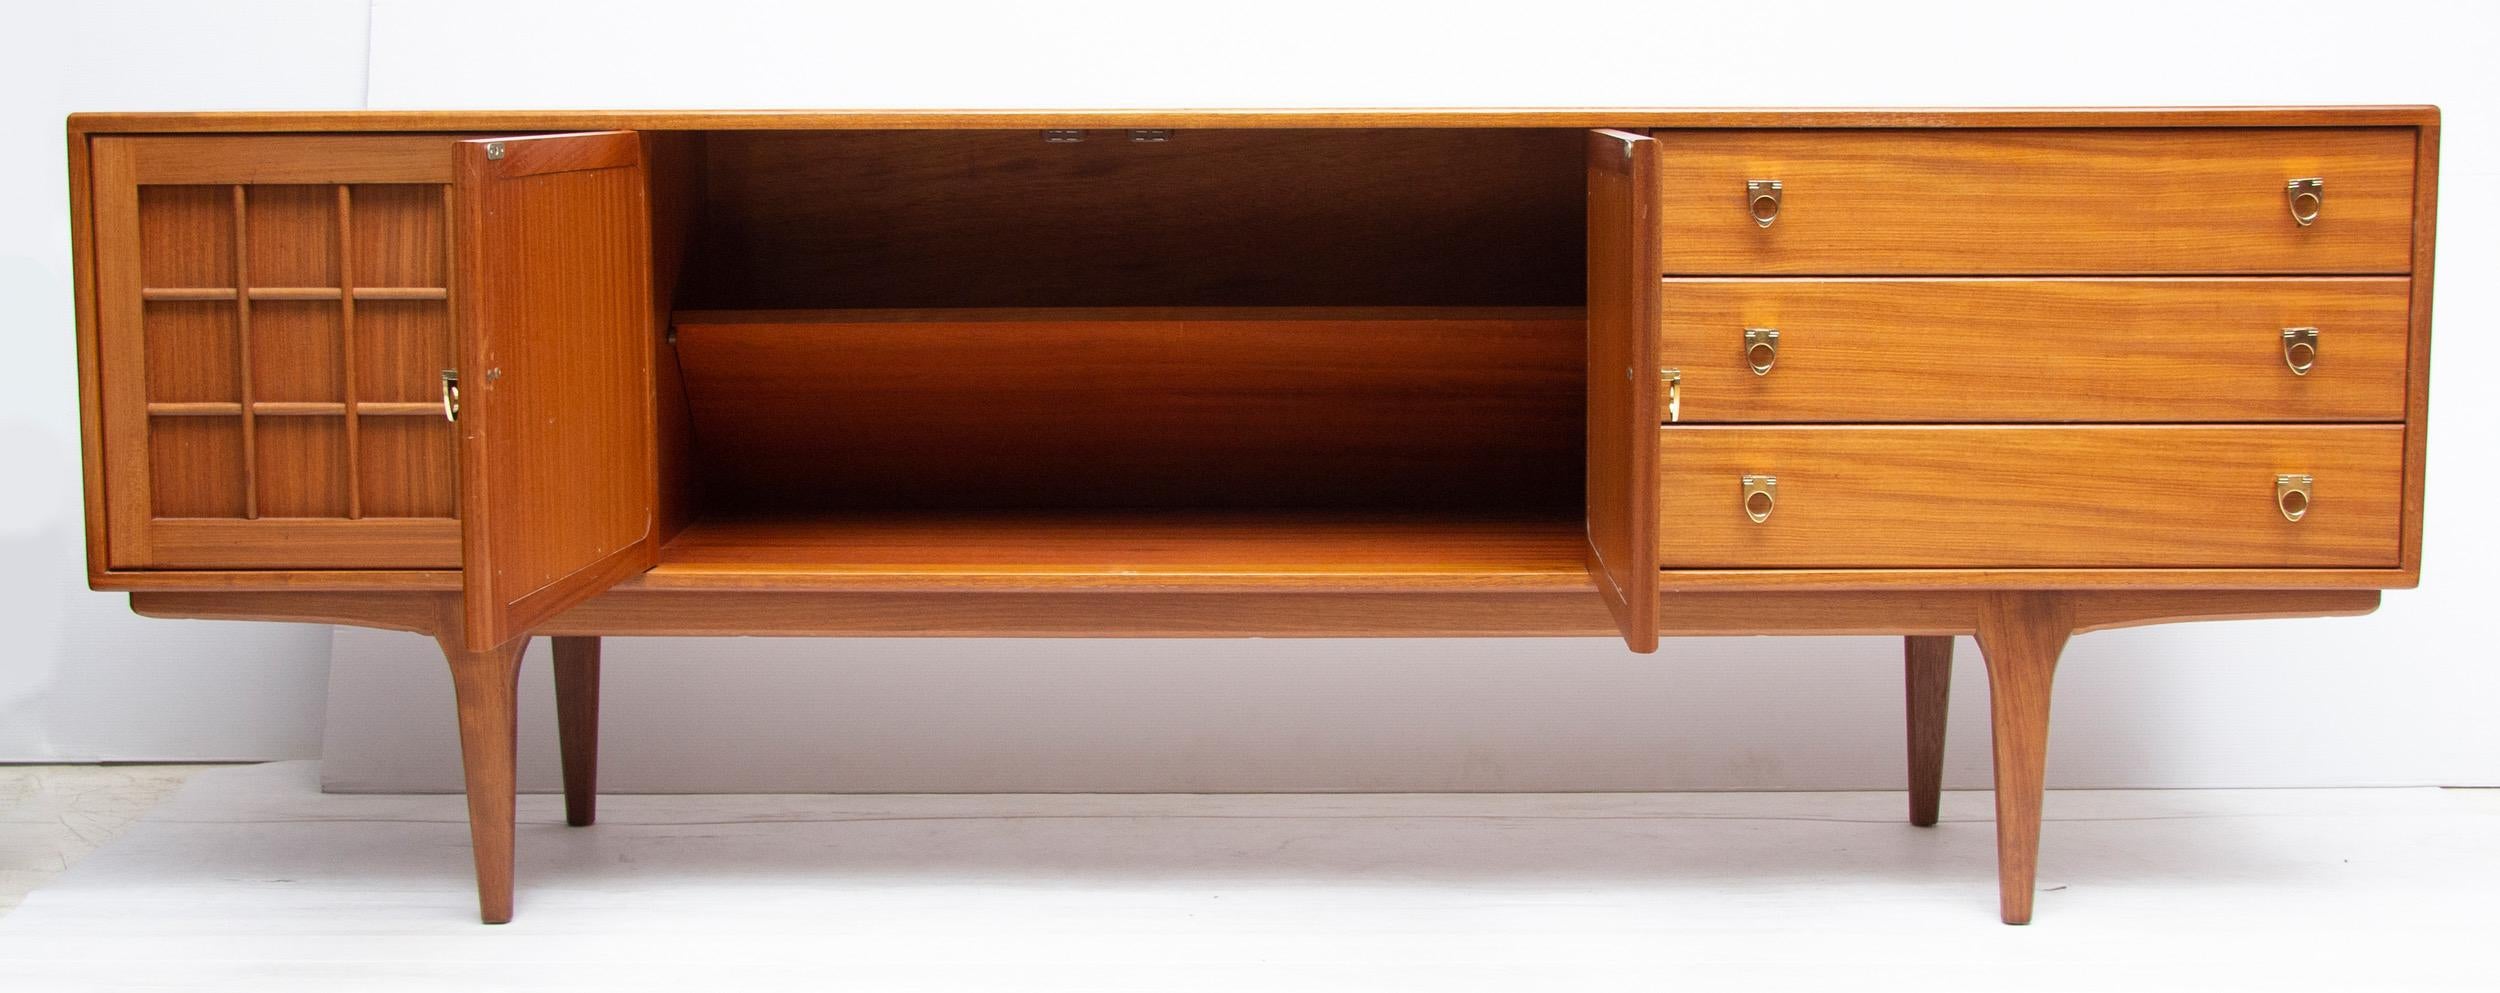 Midcentury sideboard credenza.
Beautiful golden teakwood sideboard.
Central, opposite opening panelled cupboard doors with cross bar decoration, flanked by another single cupboard and three drawers, with brass ring pull handles
Manufactured in